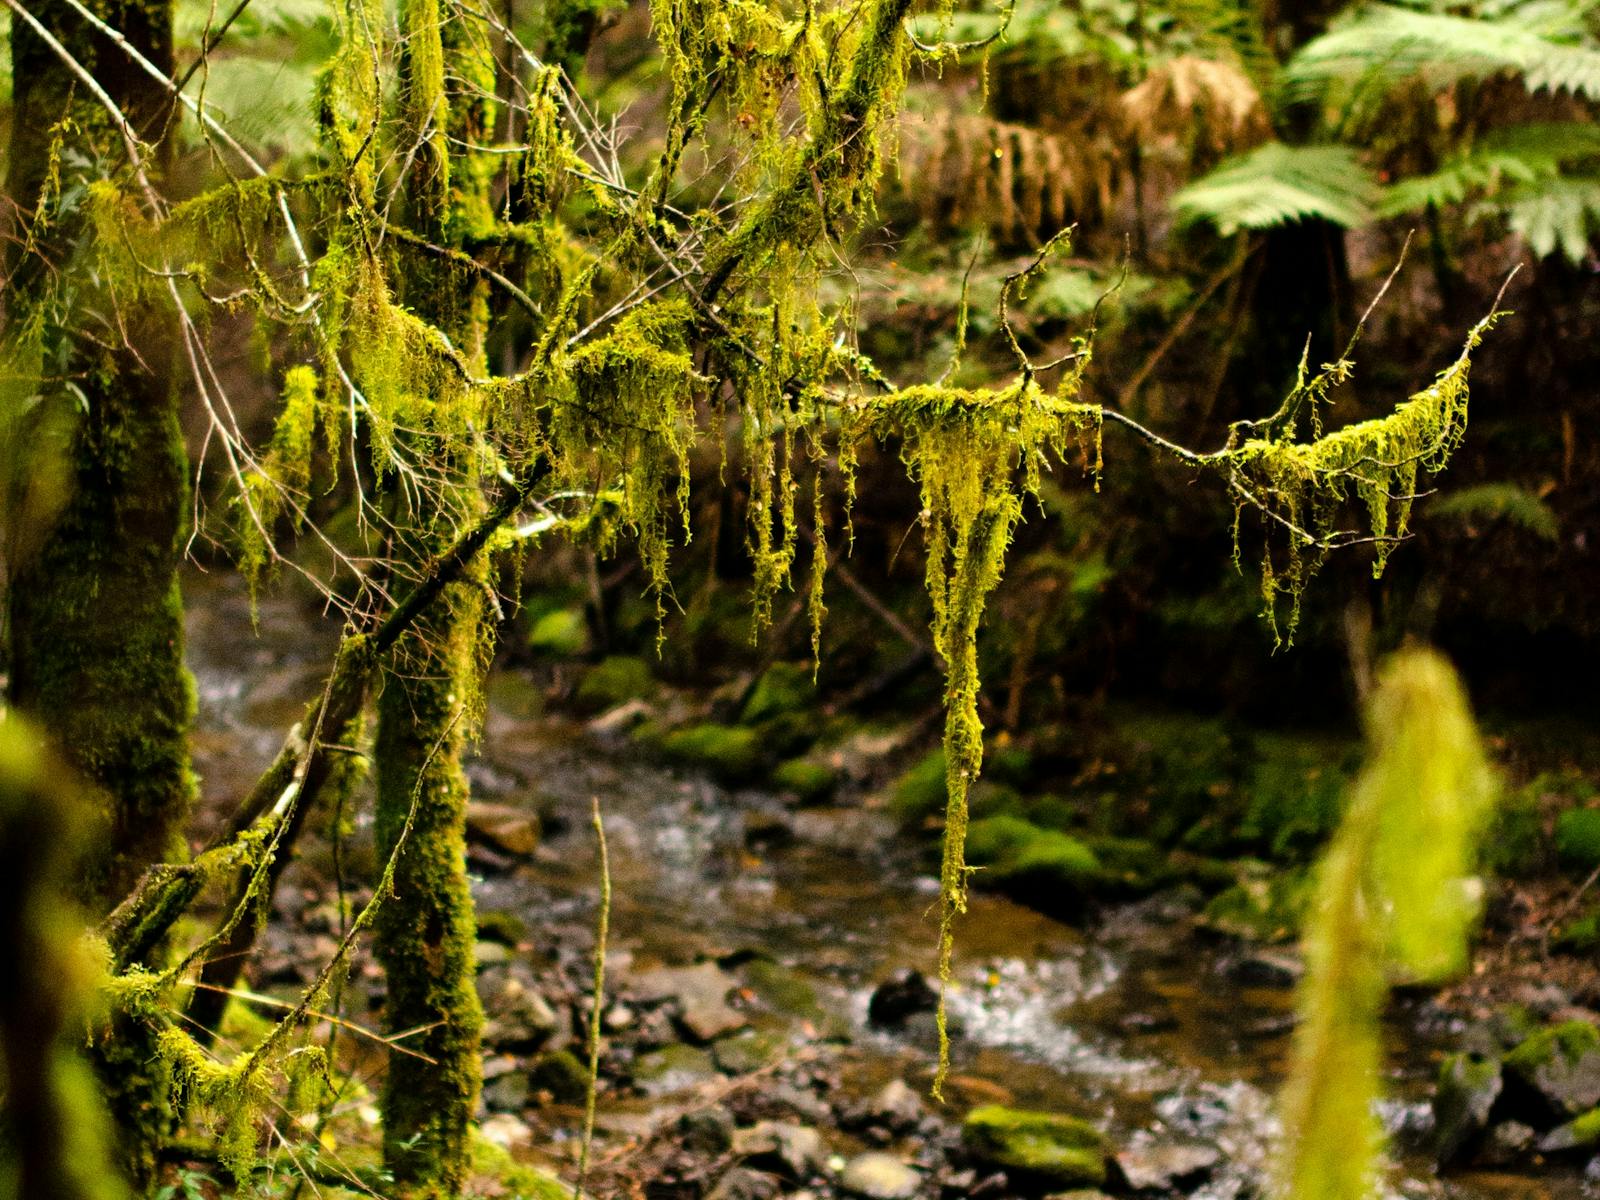 View of the Julius River through moss covered trees